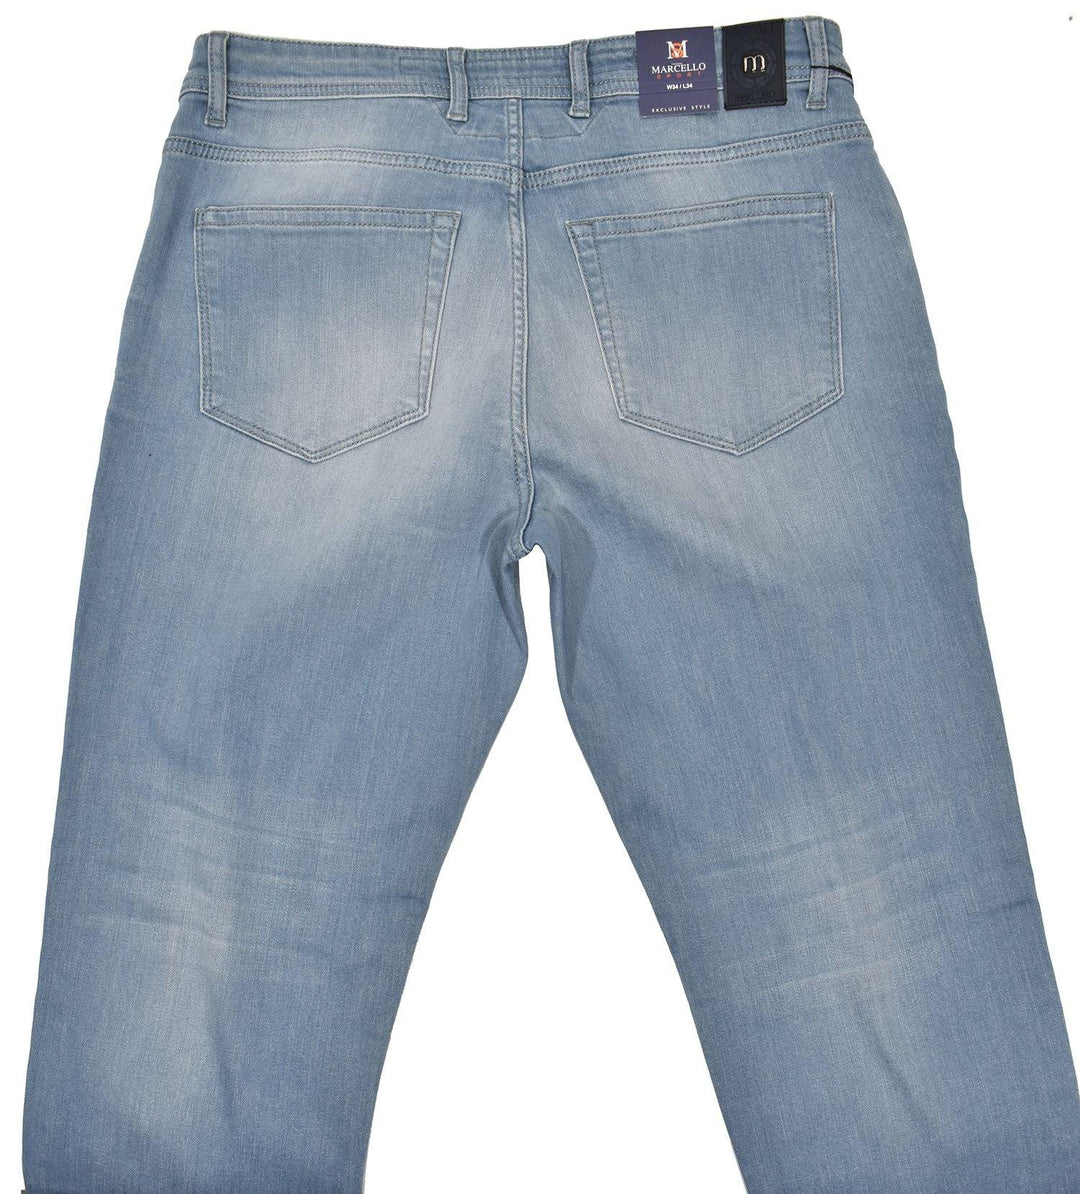 Marcello’s best fitting lightweight washed denim. Feels and looks great! Our comfort fit from the waist band down to the thighs, then tapering the leg to the bottom provides the best of both worlds.  Comfort where you need it and updated fashion sporting a slimmed leg.  Add the benefit of stretch to work with your natural movements and you have found an excellent jean that will become your go to jean of choice.  Marcello Distressed Comfort Denim